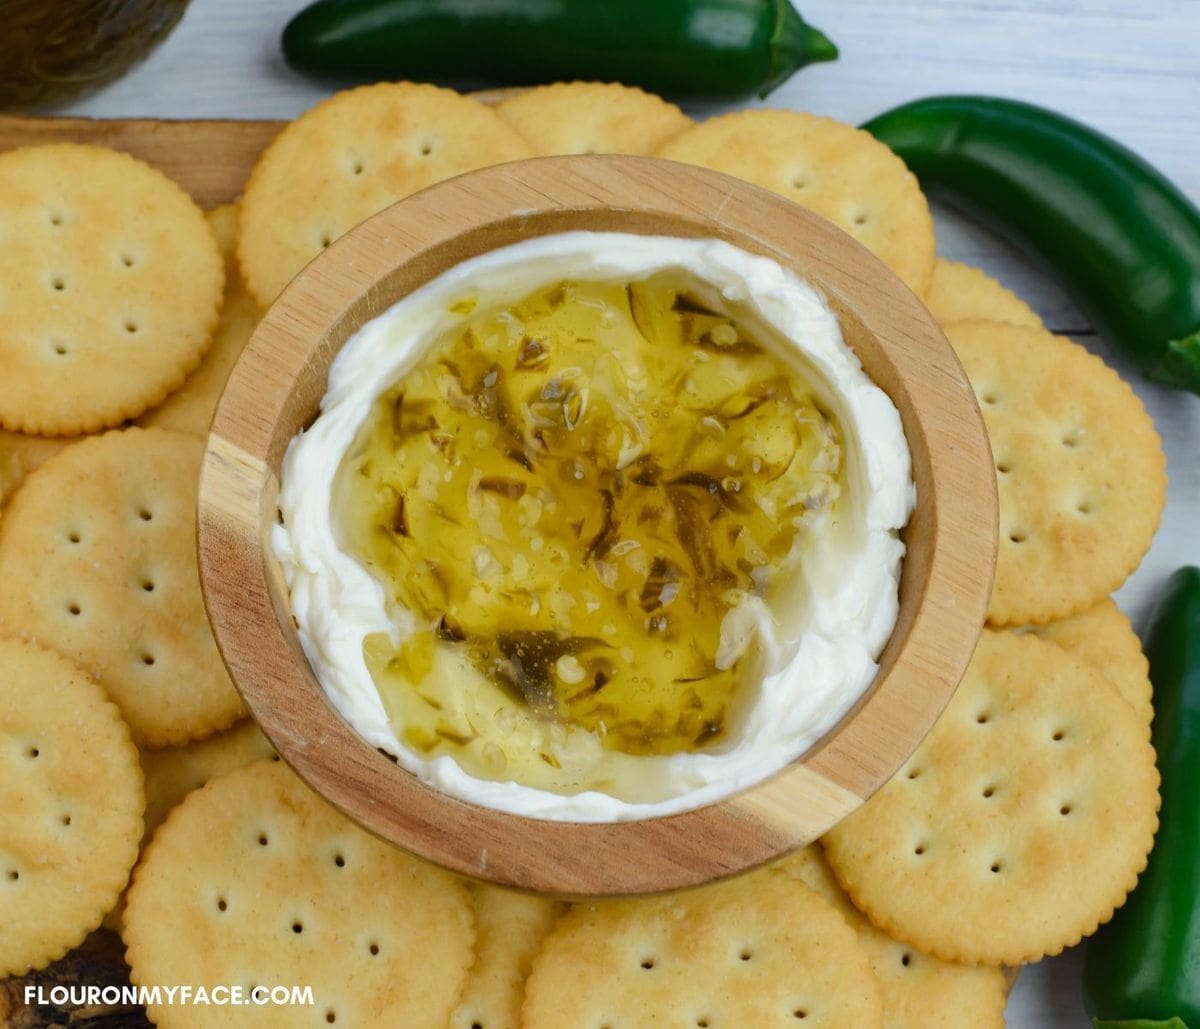 A wooden bowl filled with cream cheese and pepper jelly with crackers around the bowl.